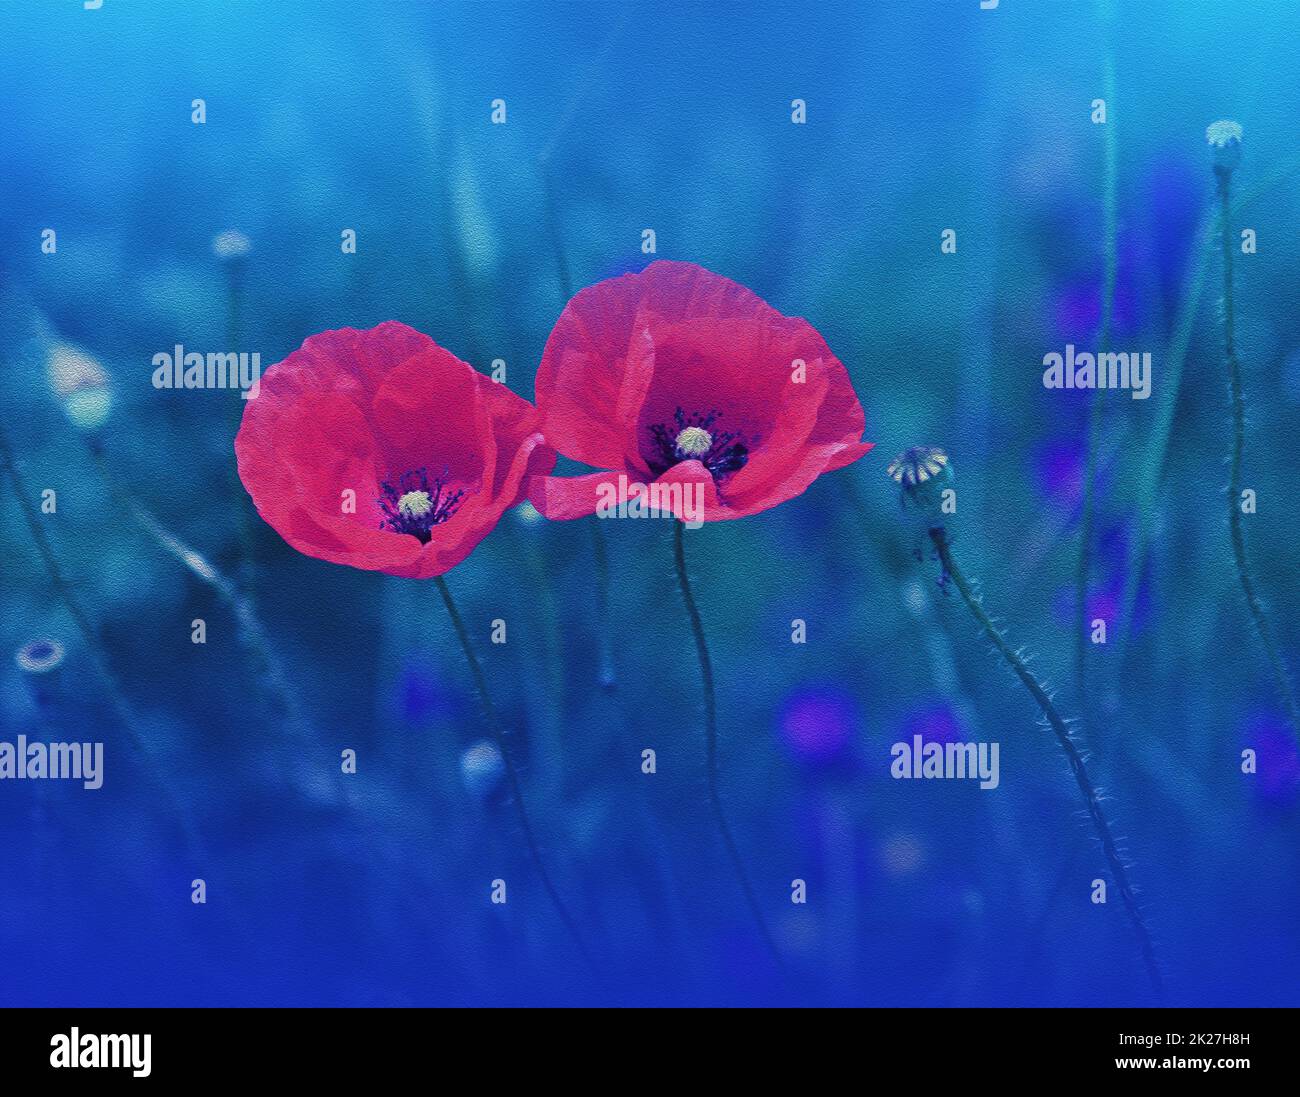 Beautiful Macro Photo.Magic Red Poppy Flower.Floral Art Design.Close up Photography.Conceptual Abstract Image.Blue Background.Fantasy Art.Creative Wallpaper.Beautiful Nature Background.Amazing Spring Poppies Flowers.Copy Space.Wedding Invitation. Stock Photo